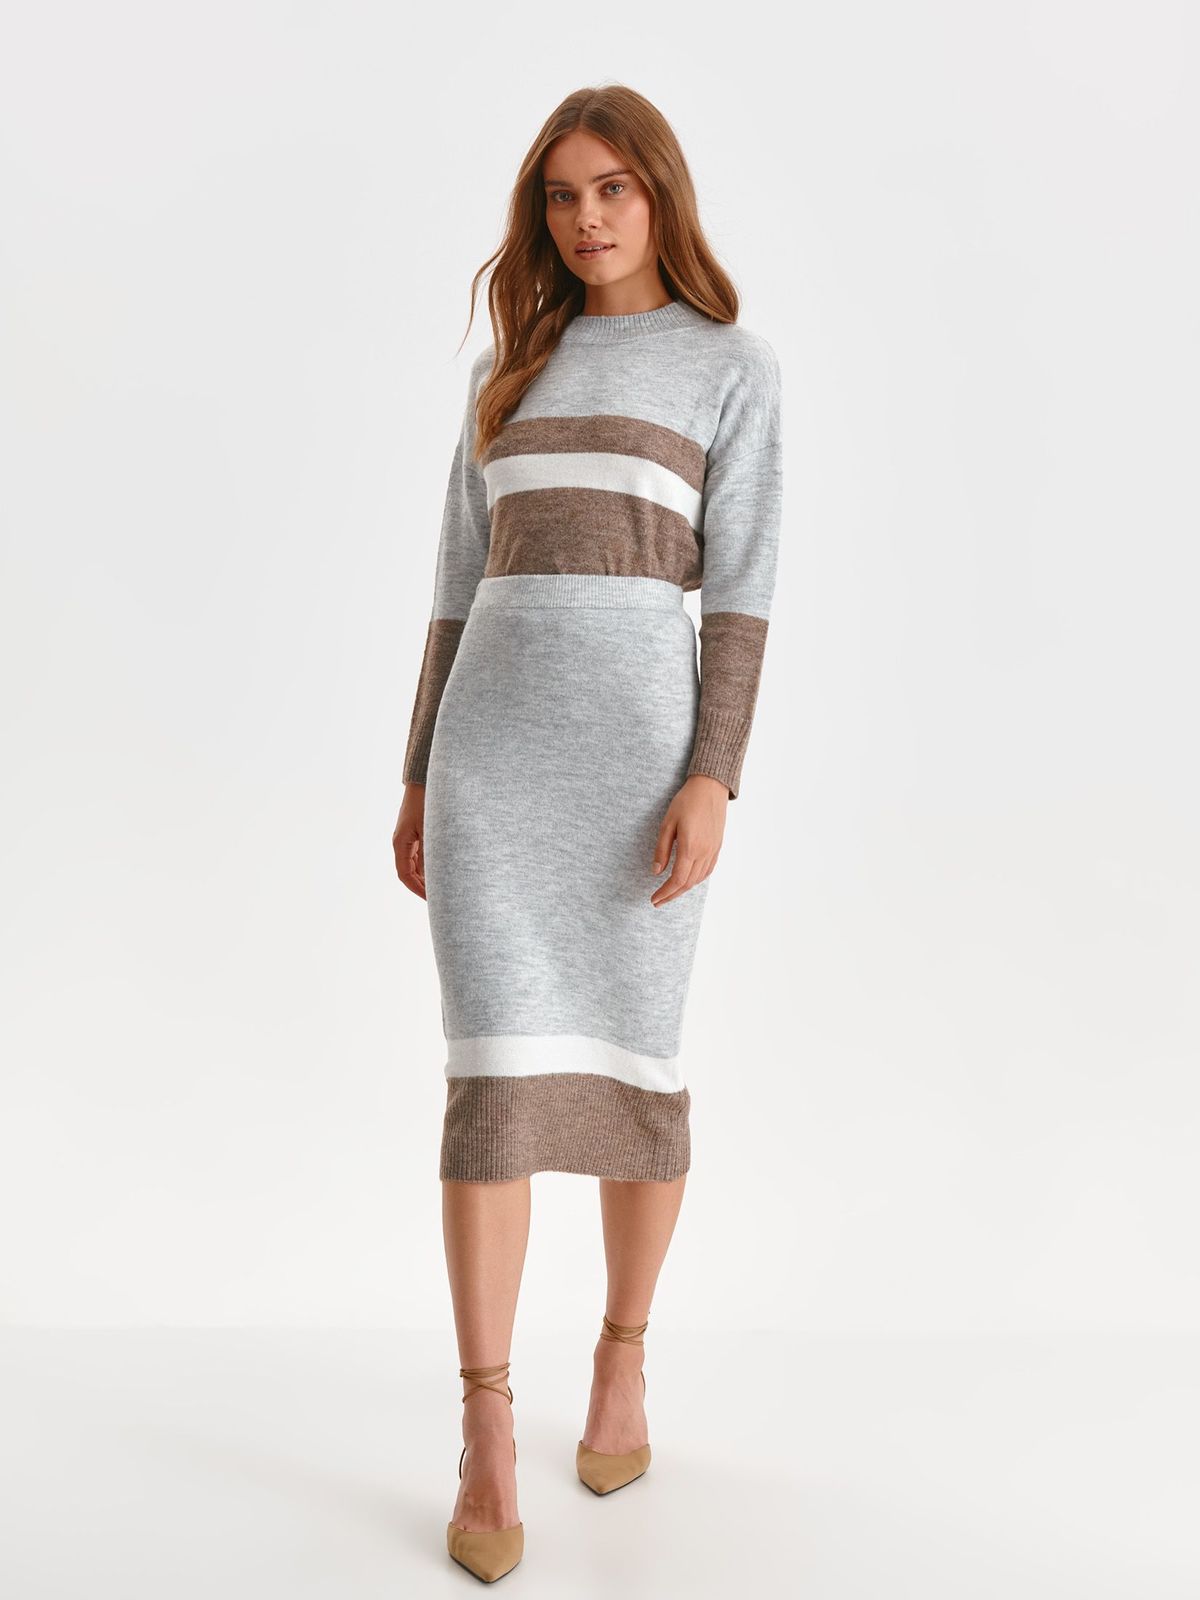 Grey skirt knitted midi pencil high waisted